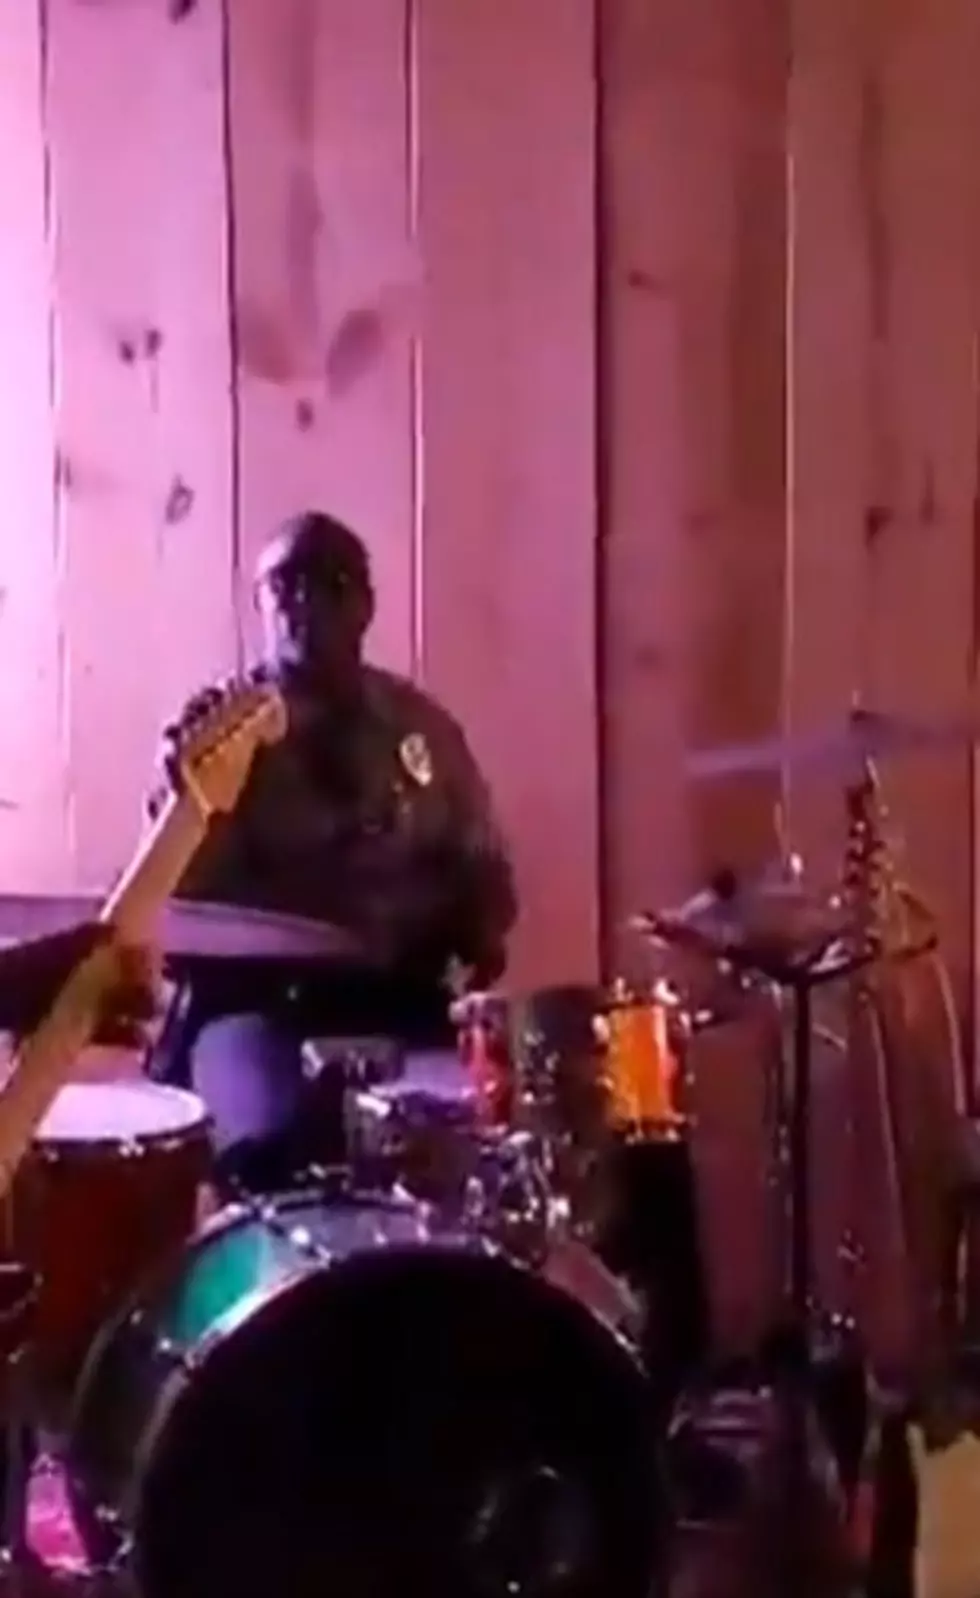 Oklahoma Police Officer Gets Behind the Drums During Noise Complaint